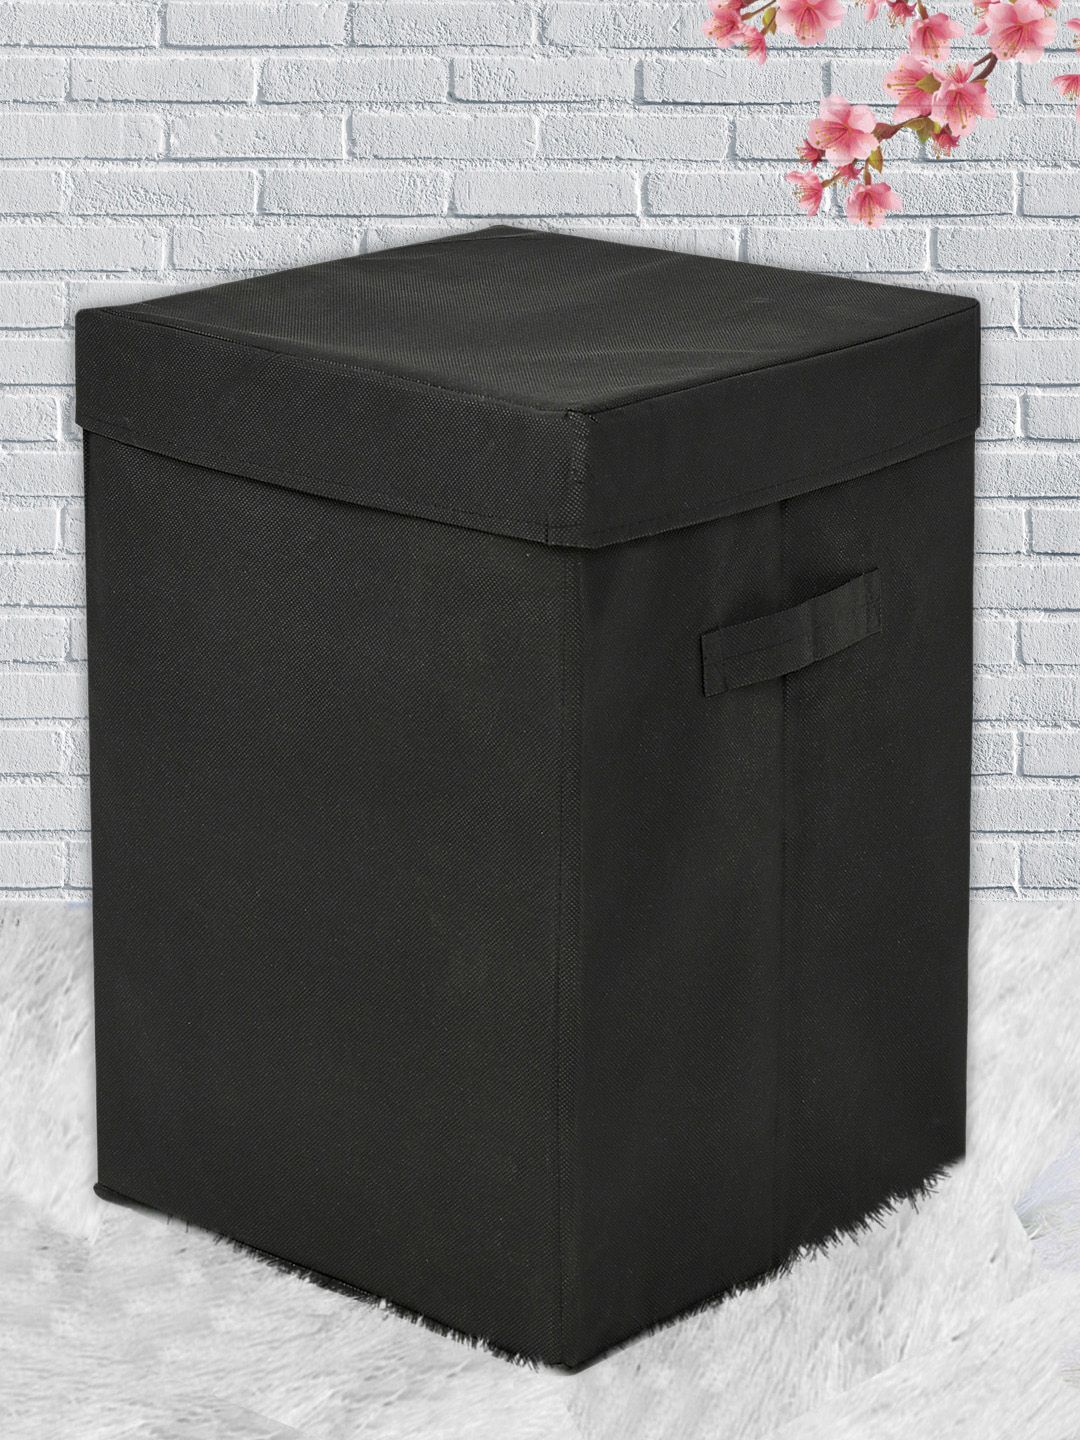 Kuber Industries Black Solid Non-Woven Foldable Large Laundry Basket Price in India